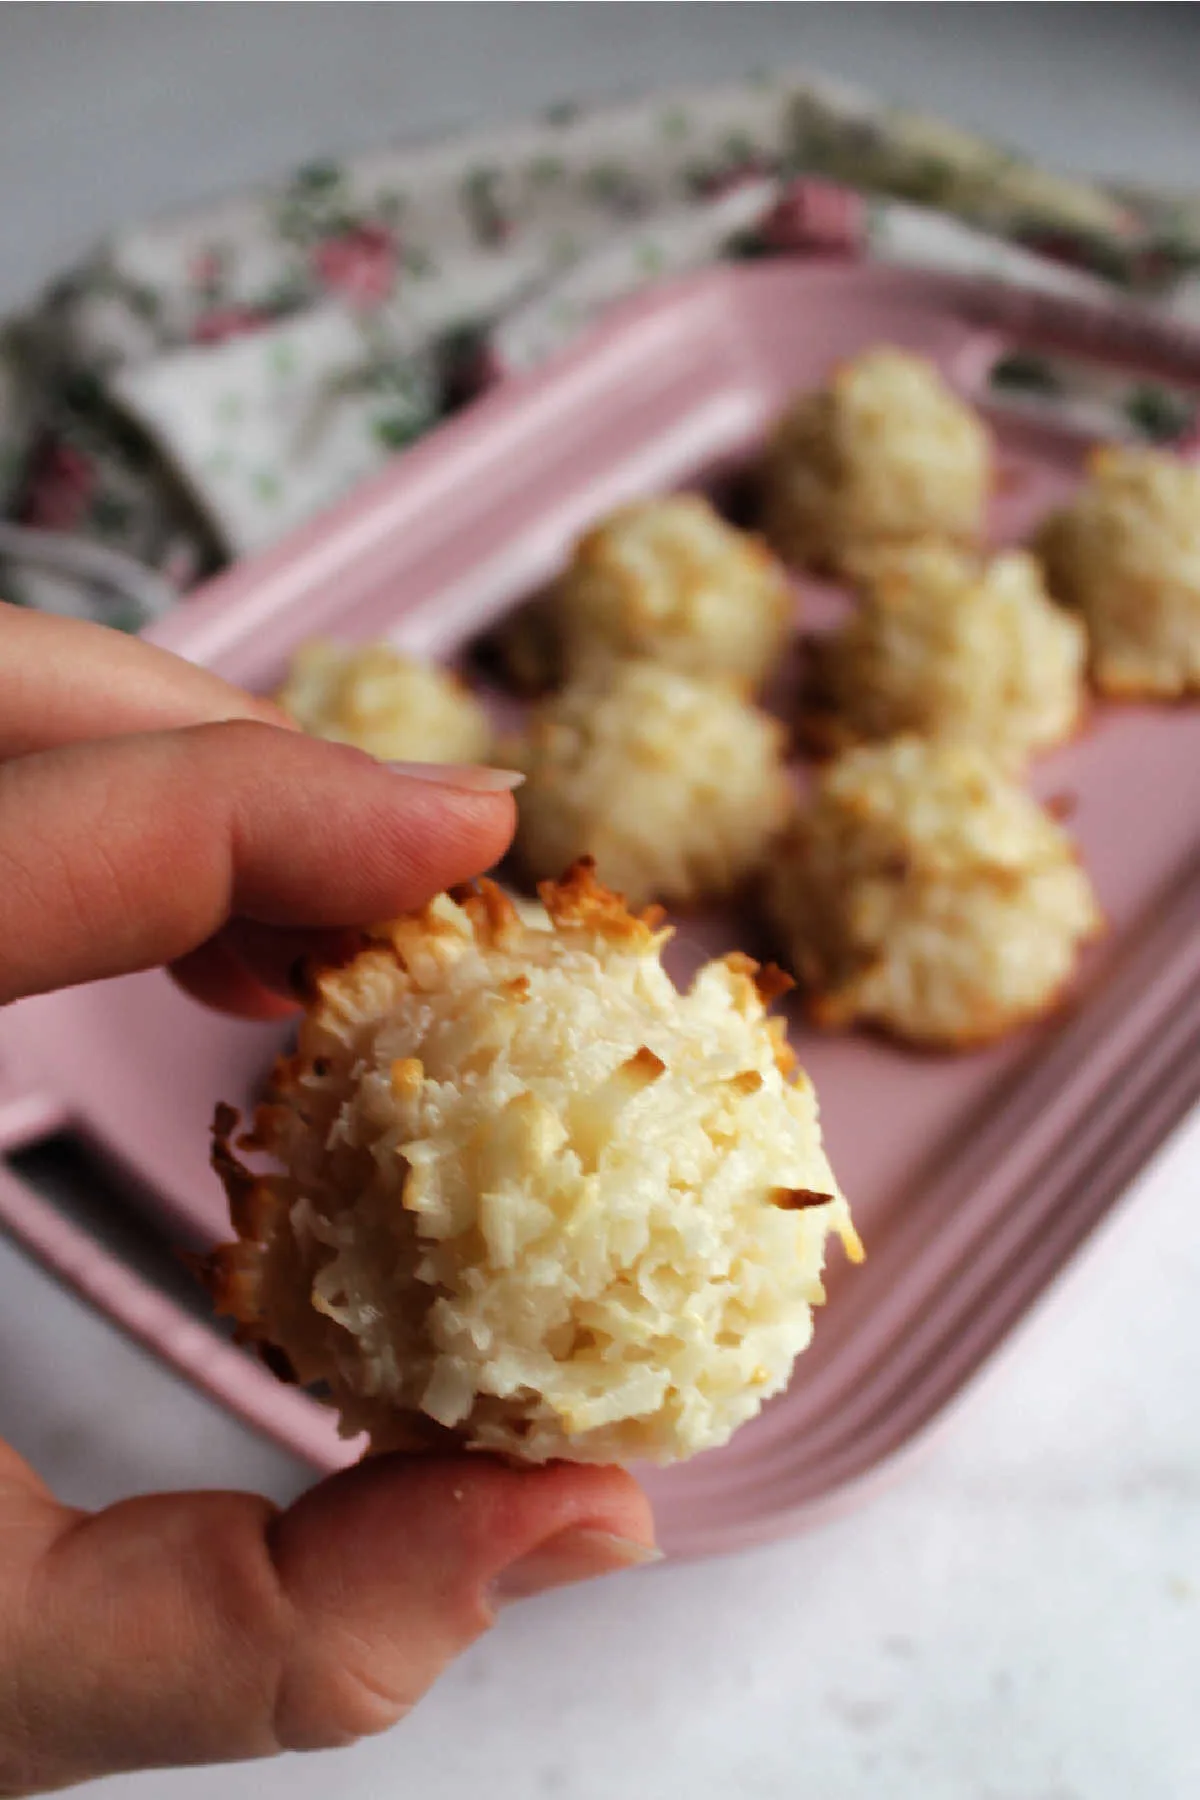 Hand holding coconut macaroon with platter of cookies in the background.